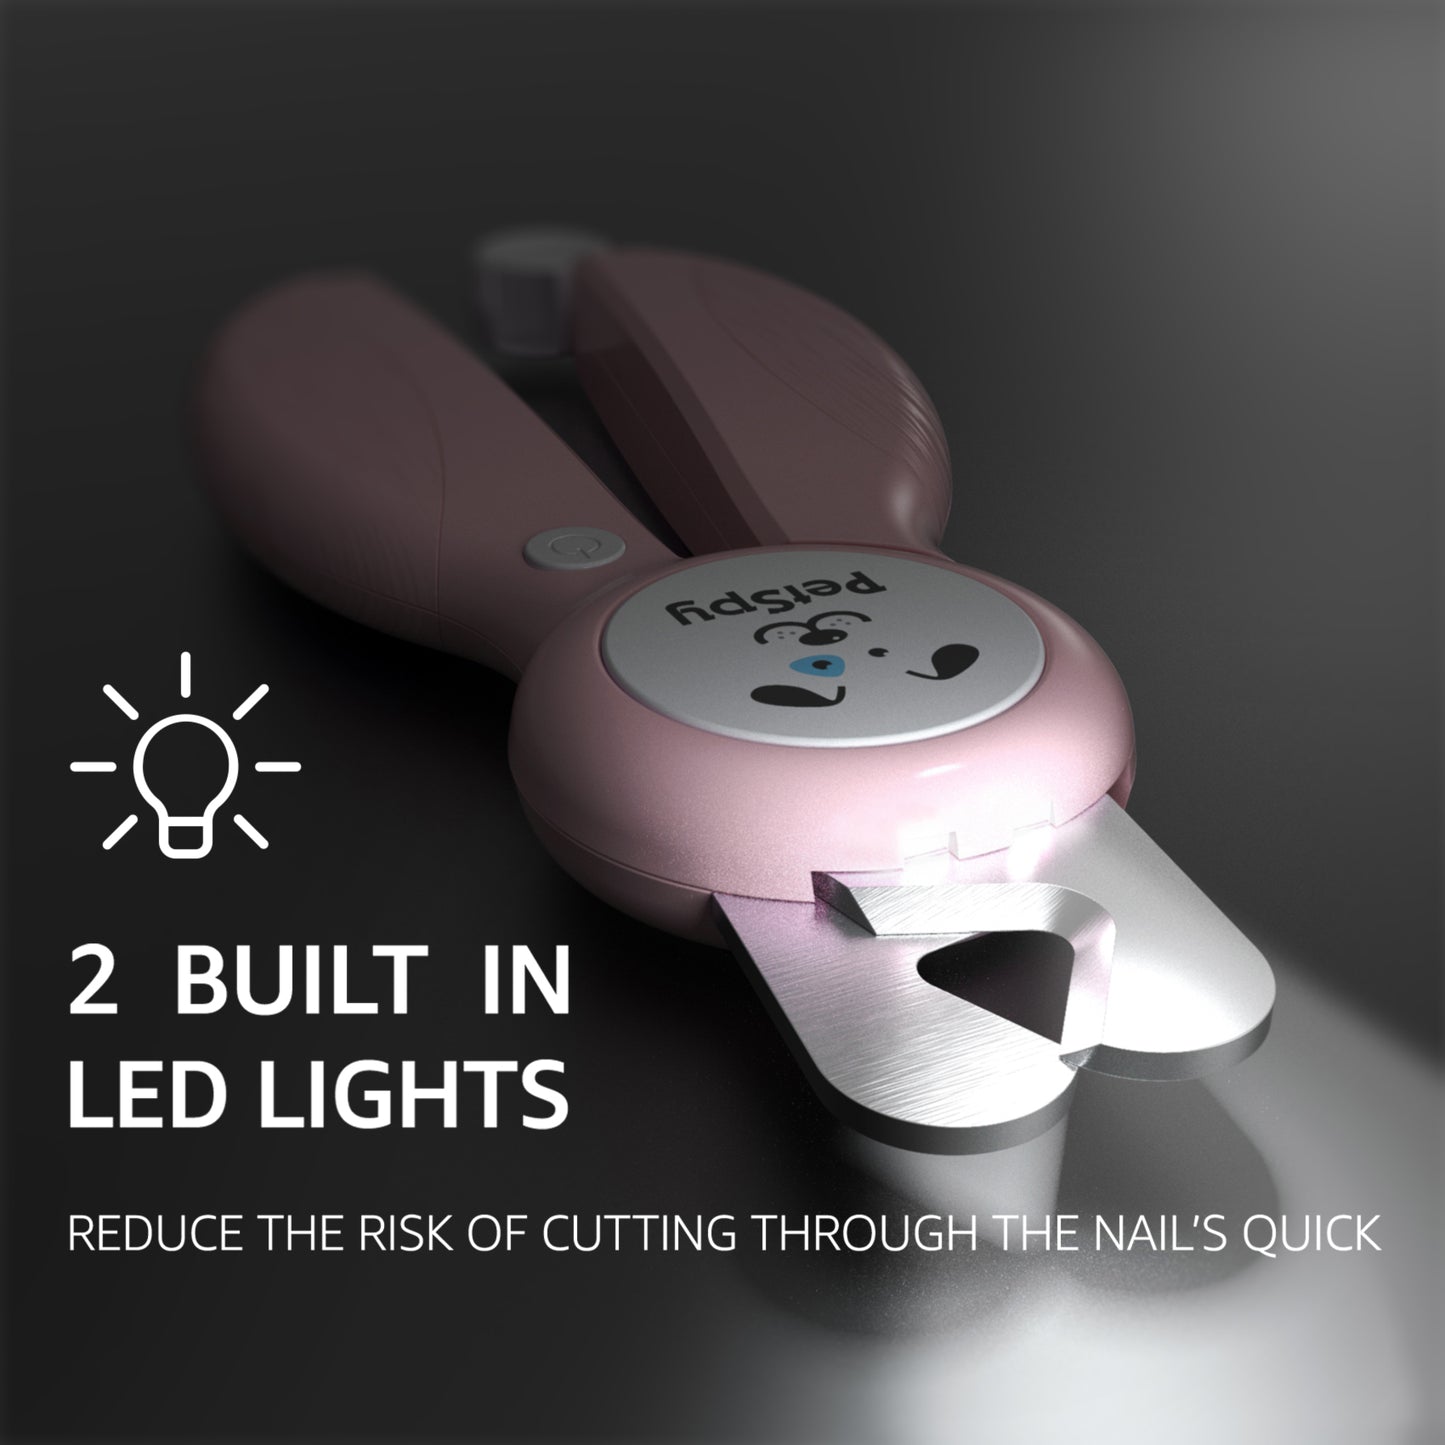 2 built in led lights reduce the risk of cutting through the nail's quick